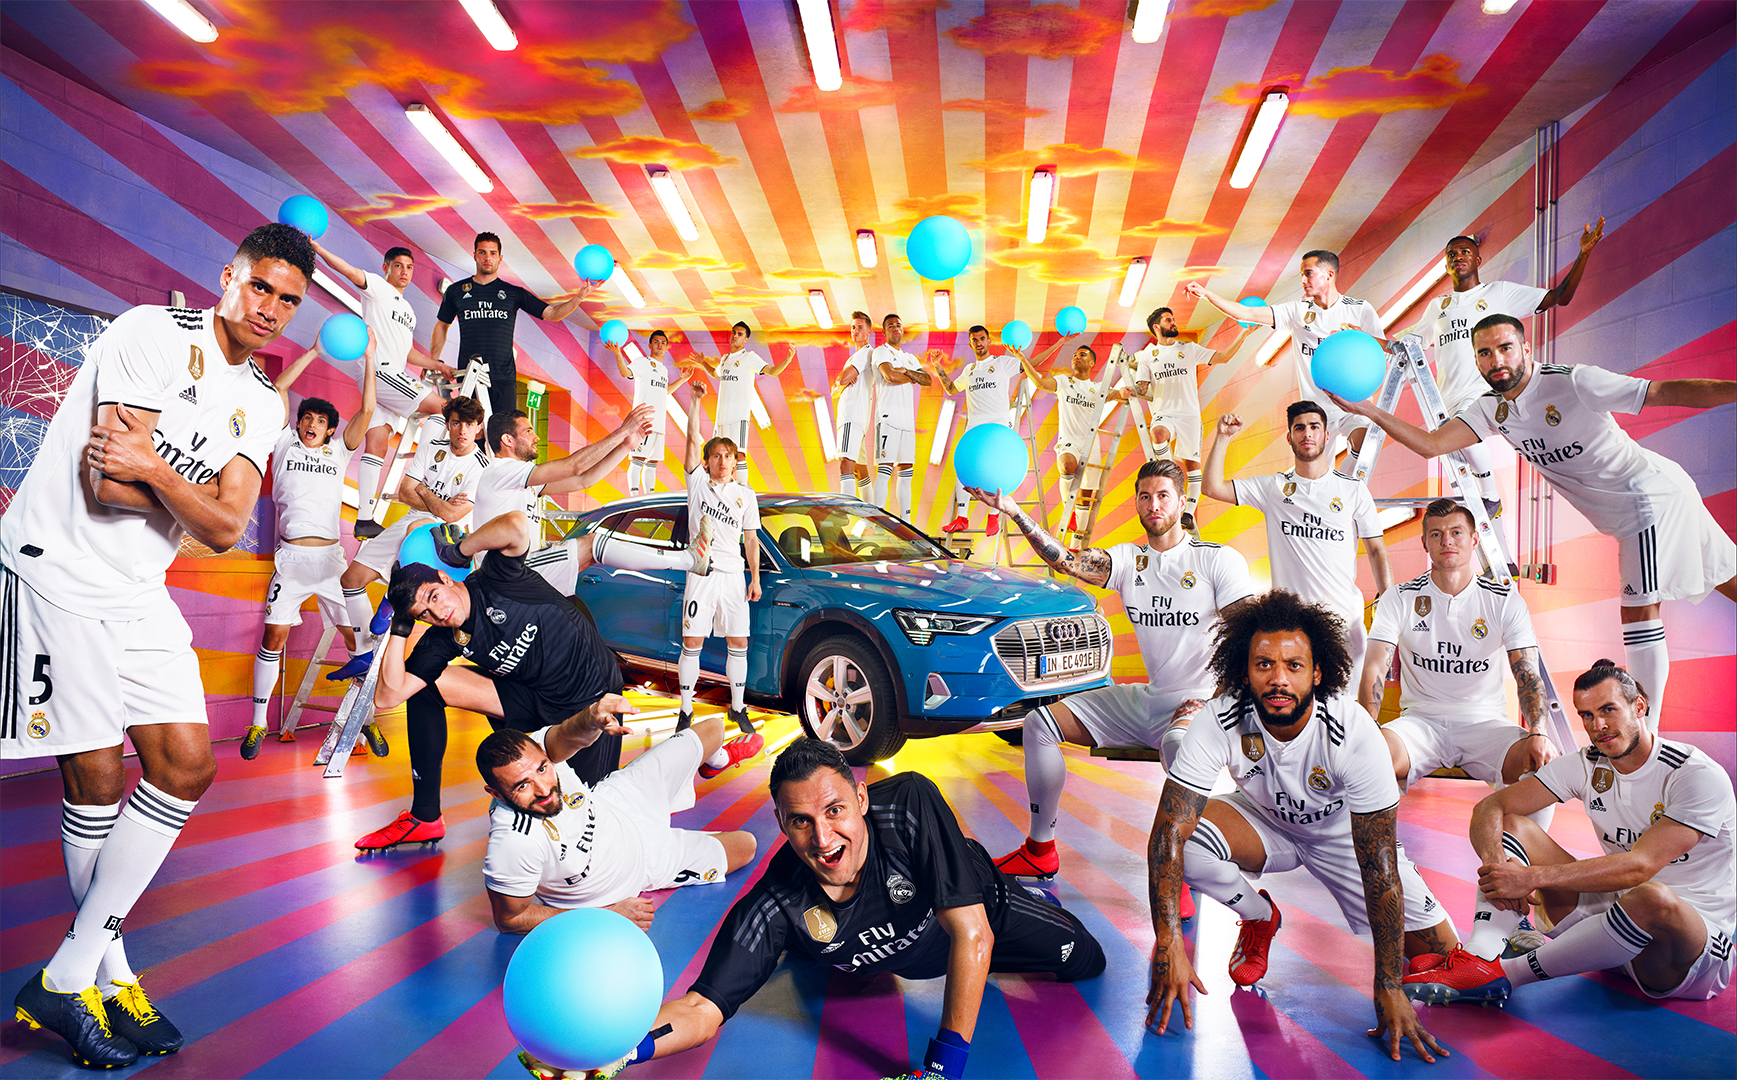 David LaChapelle | Audi x Real Madrid | David LaChapelle photographed the Real Madrid team for the launch of the new Audi E-tron. | 1